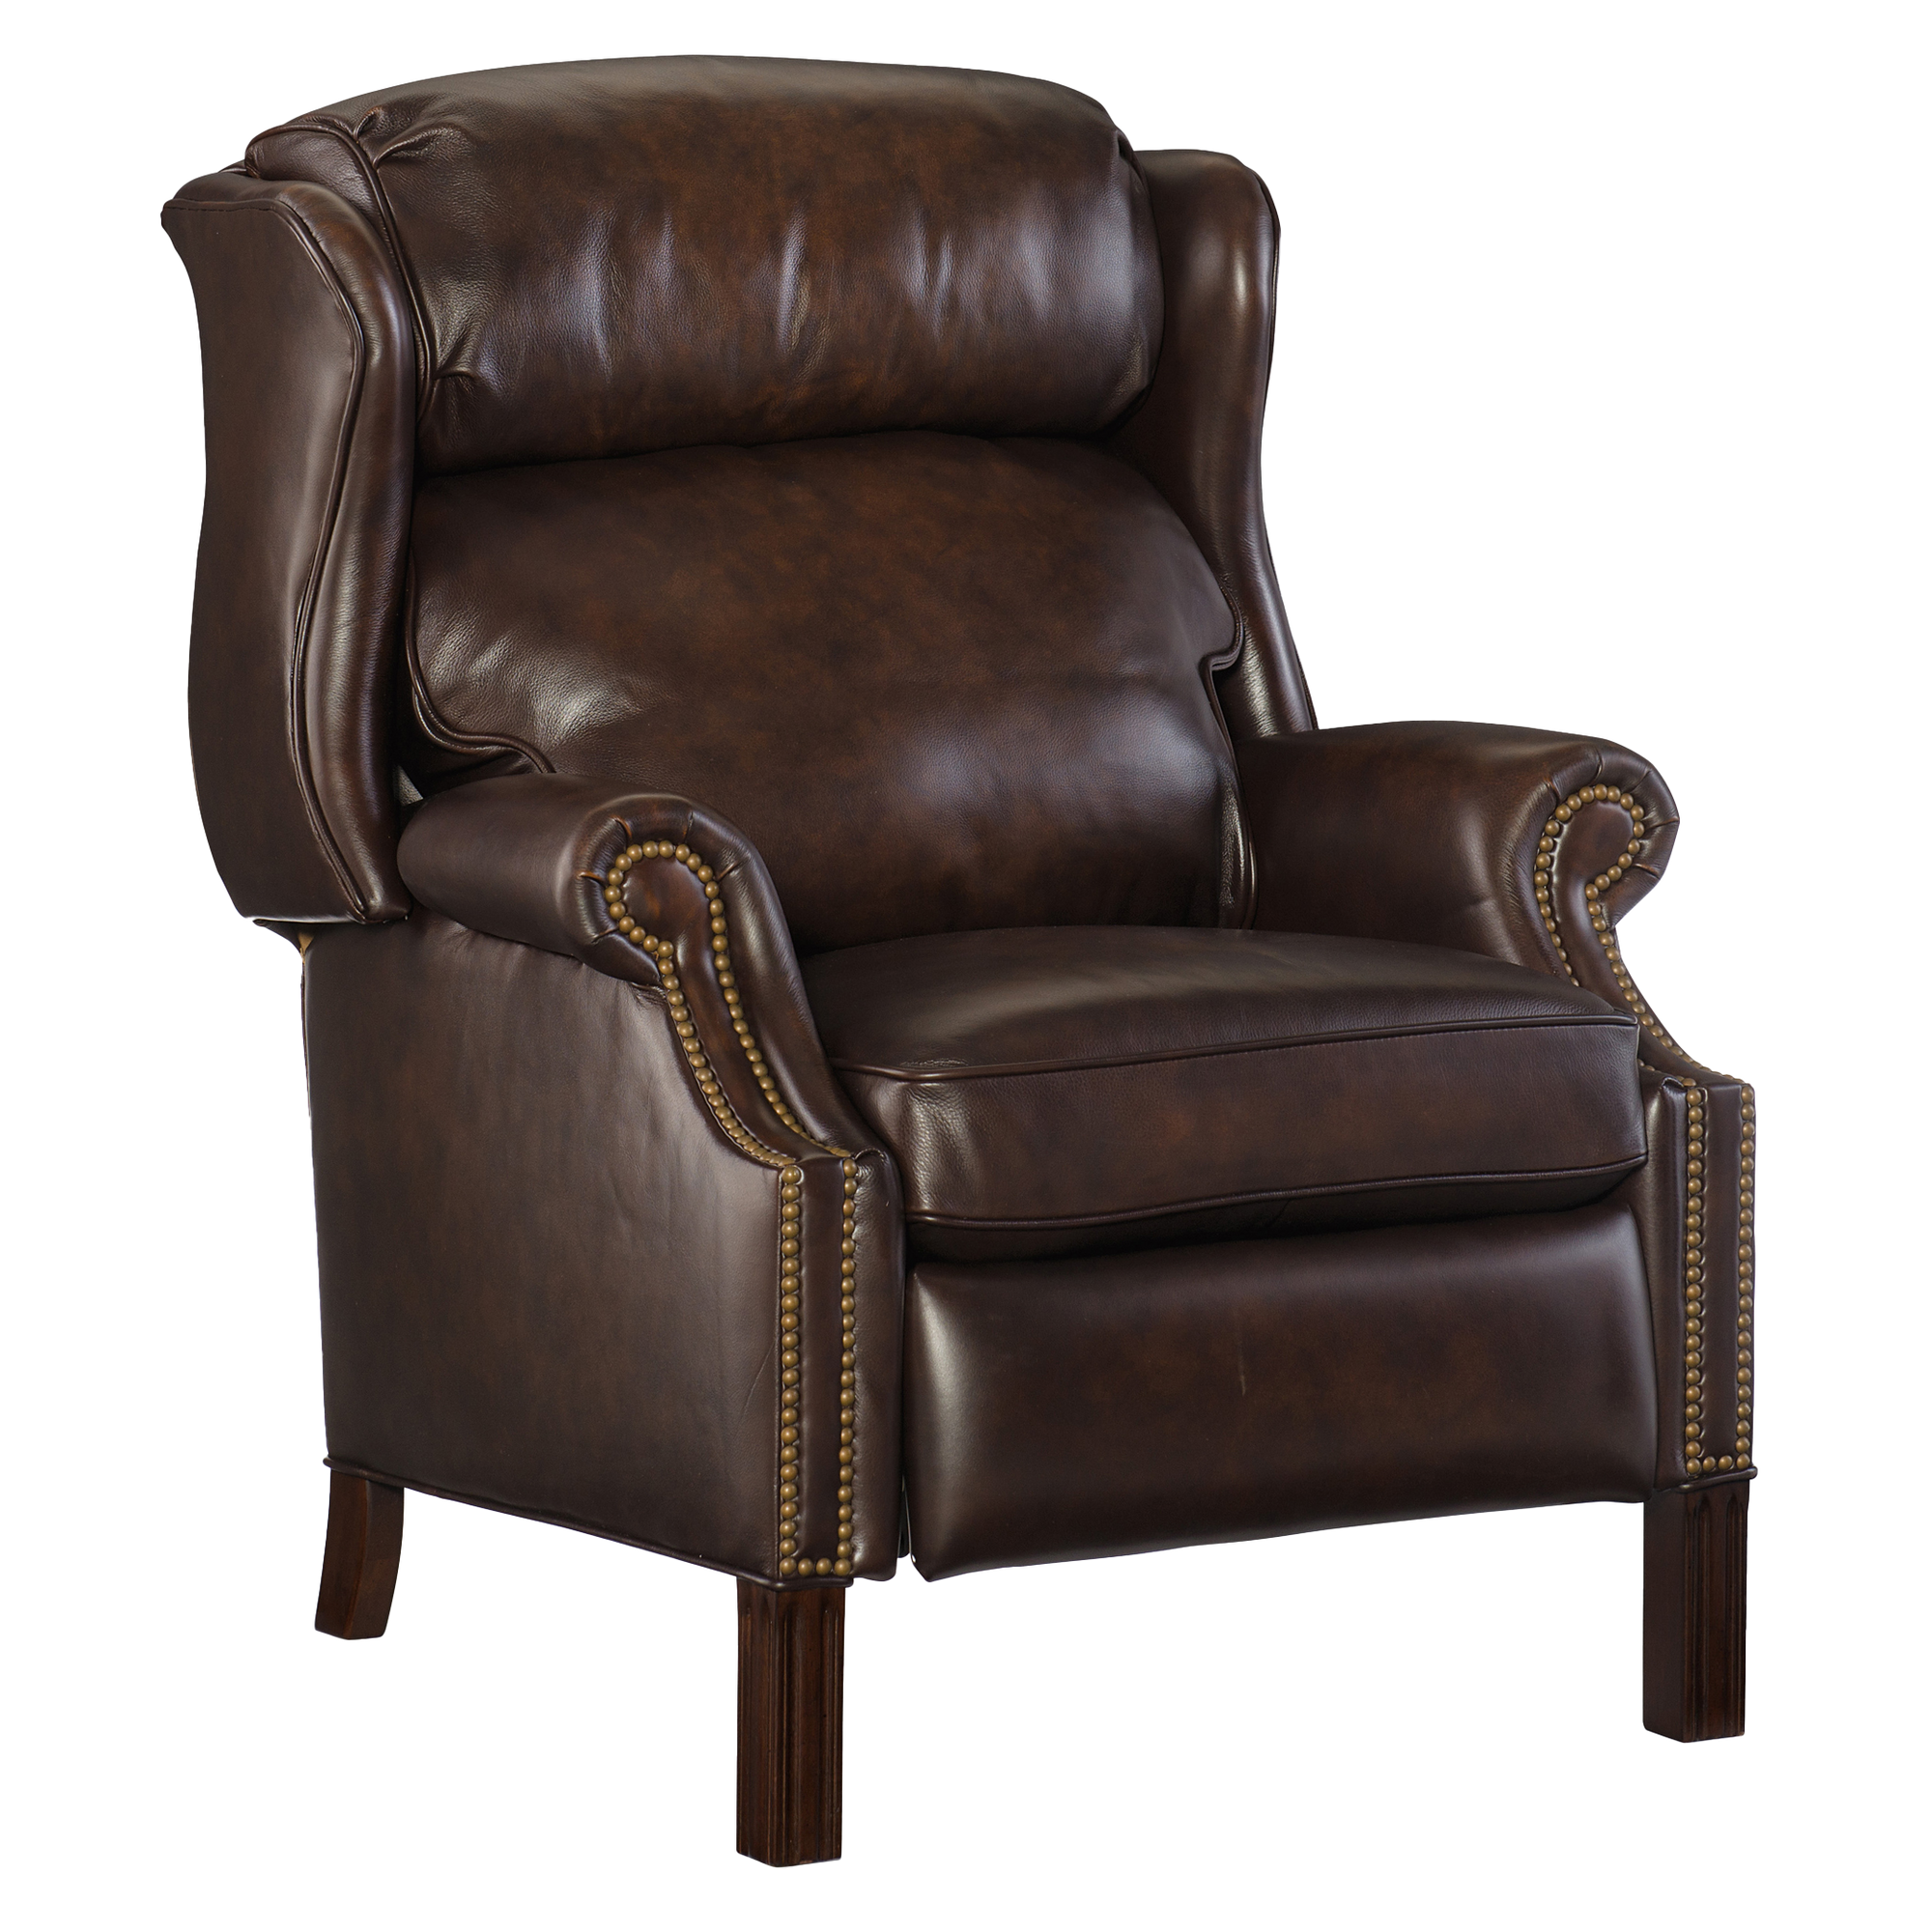 Correne Recliner Chair, Leather, Brown